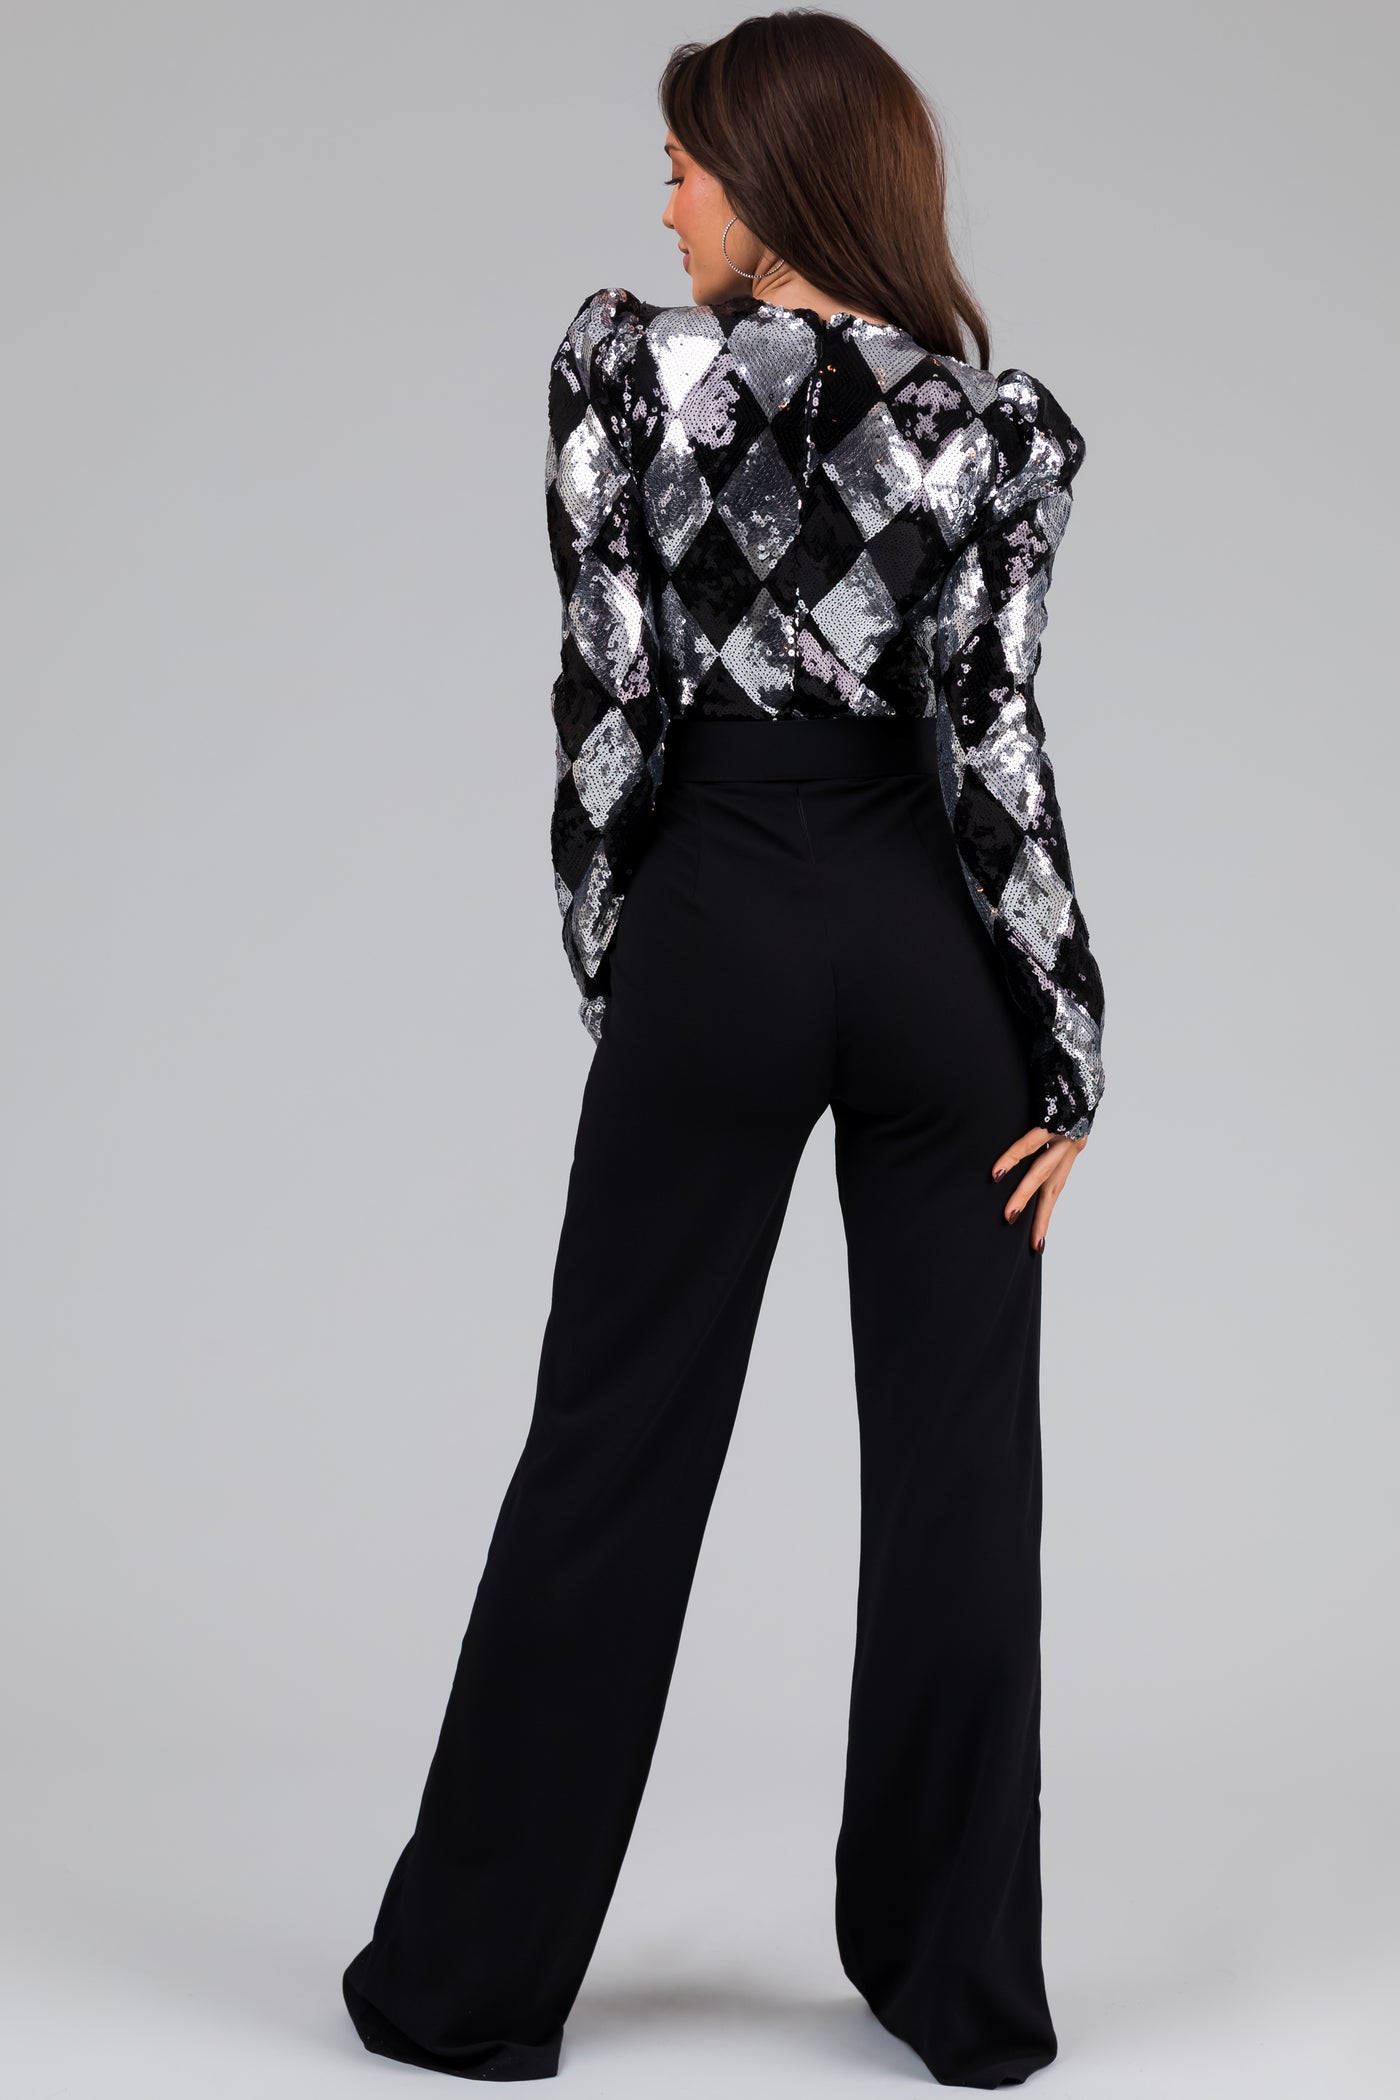 Black and Silver Rhombus Sequin Print Jumpsuit